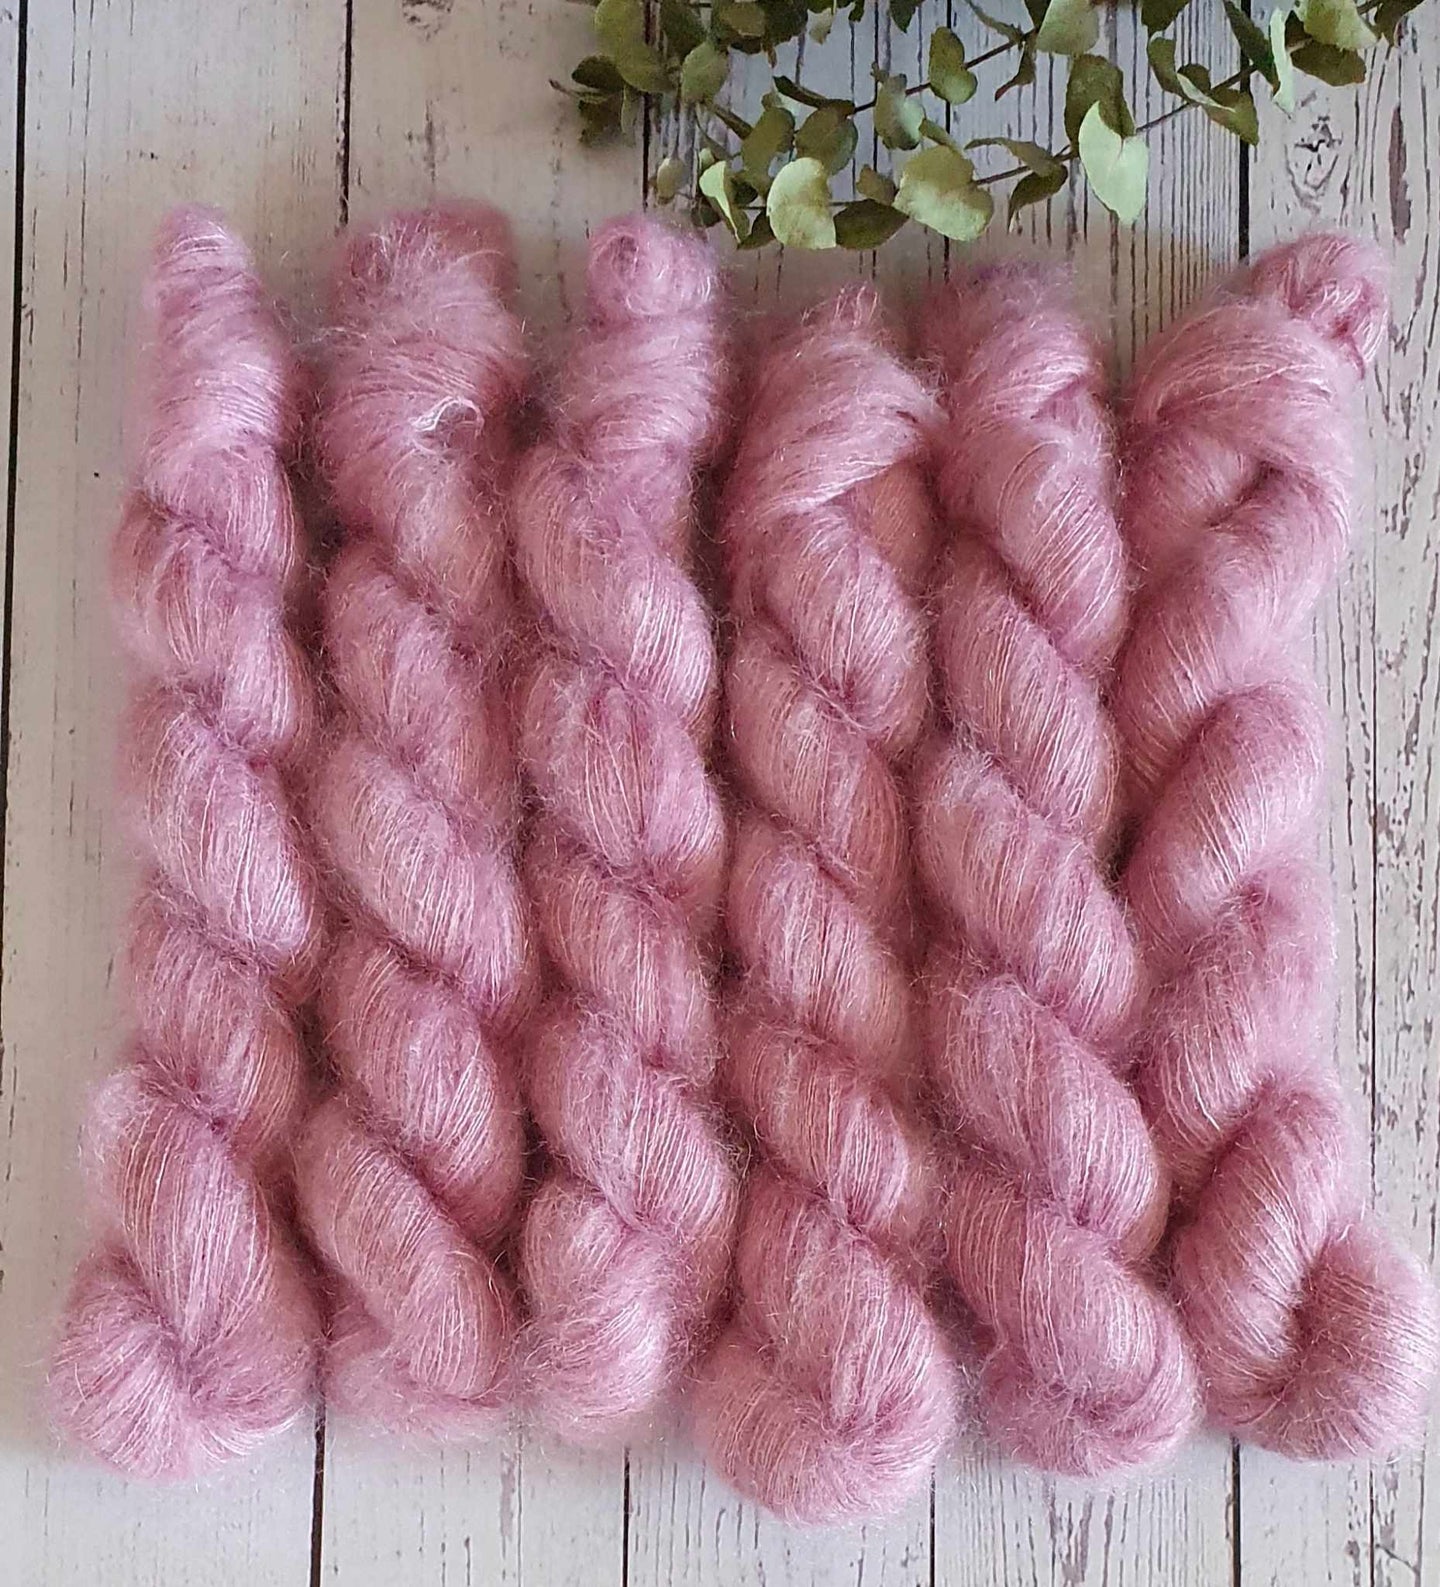 Aroma (Sylph Lace 2ply - Kid Mohair/Mulberry Silk)